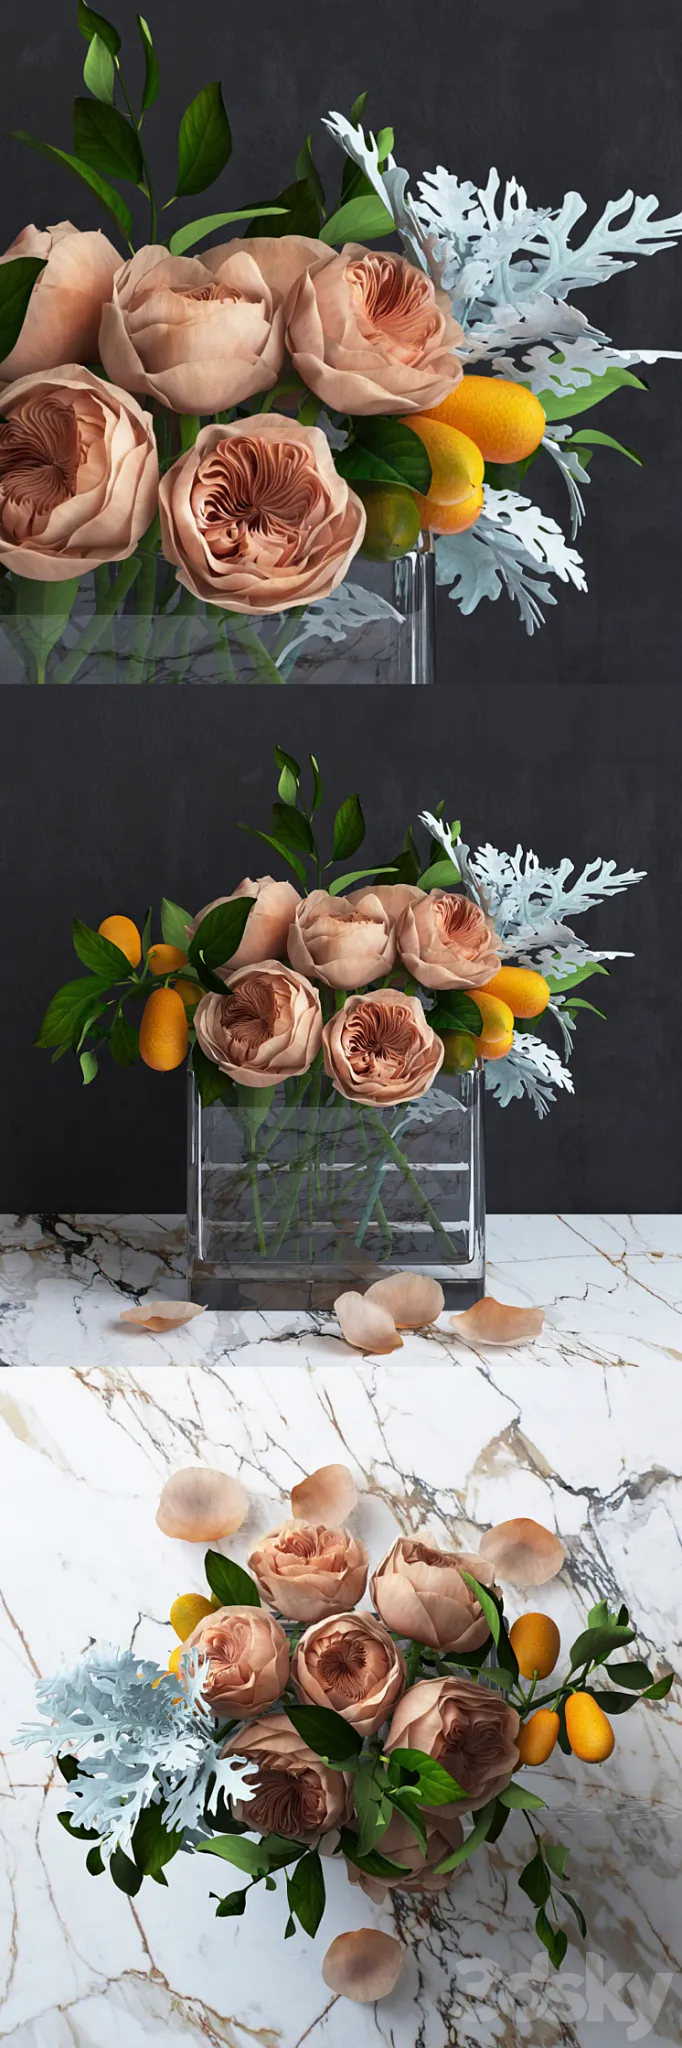 Bouquet of Austin's Roses Kumquat and Dusty Miller plant 3DS Max